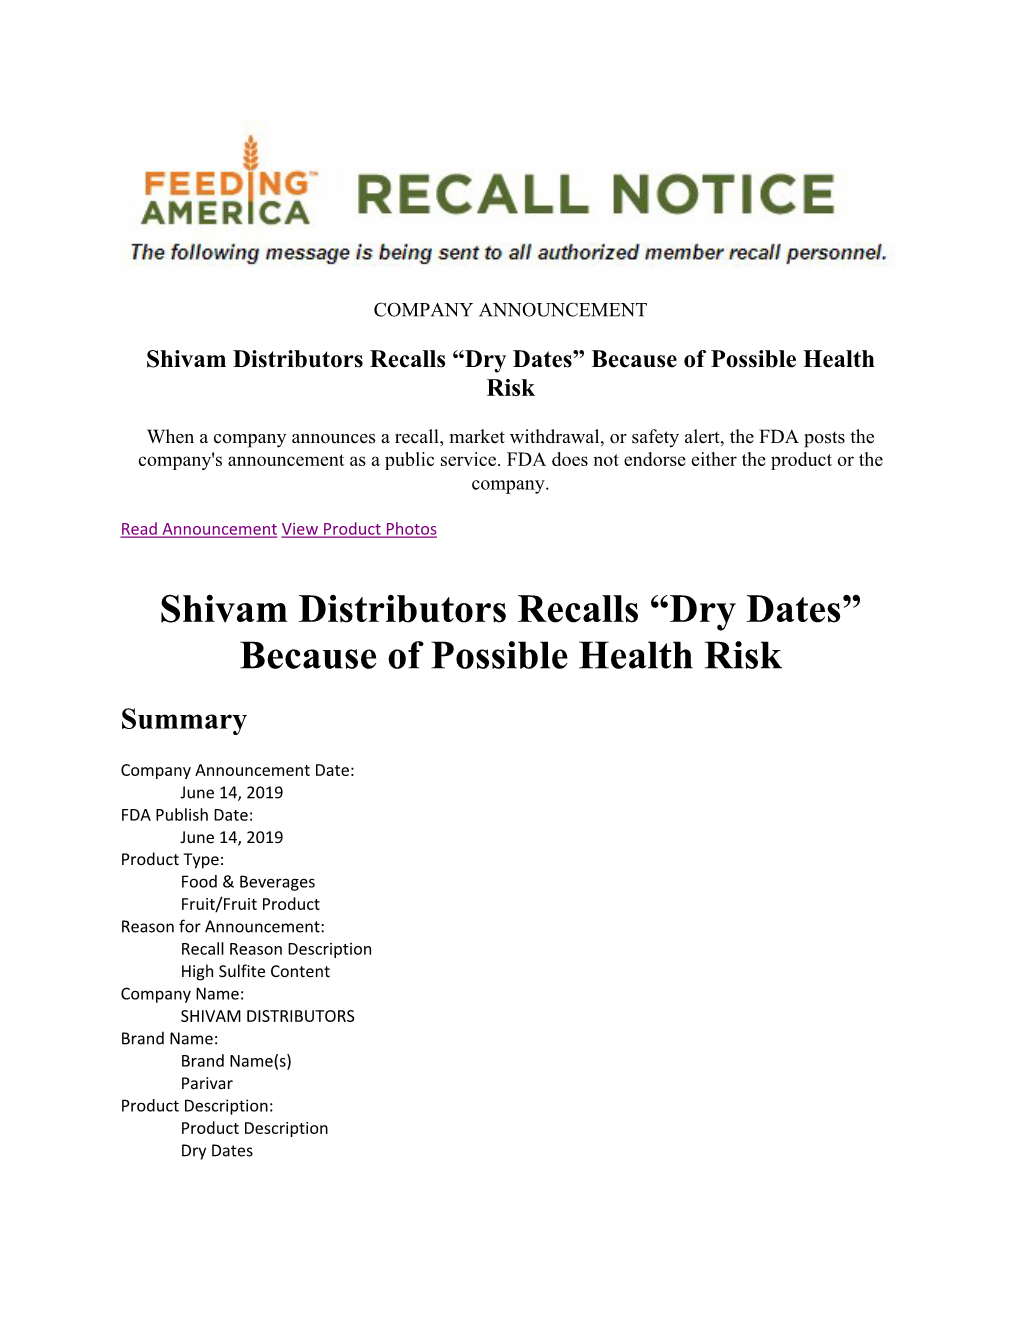 Shivam Distributors Recalls “Dry Dates” Because of Possible Health Risk